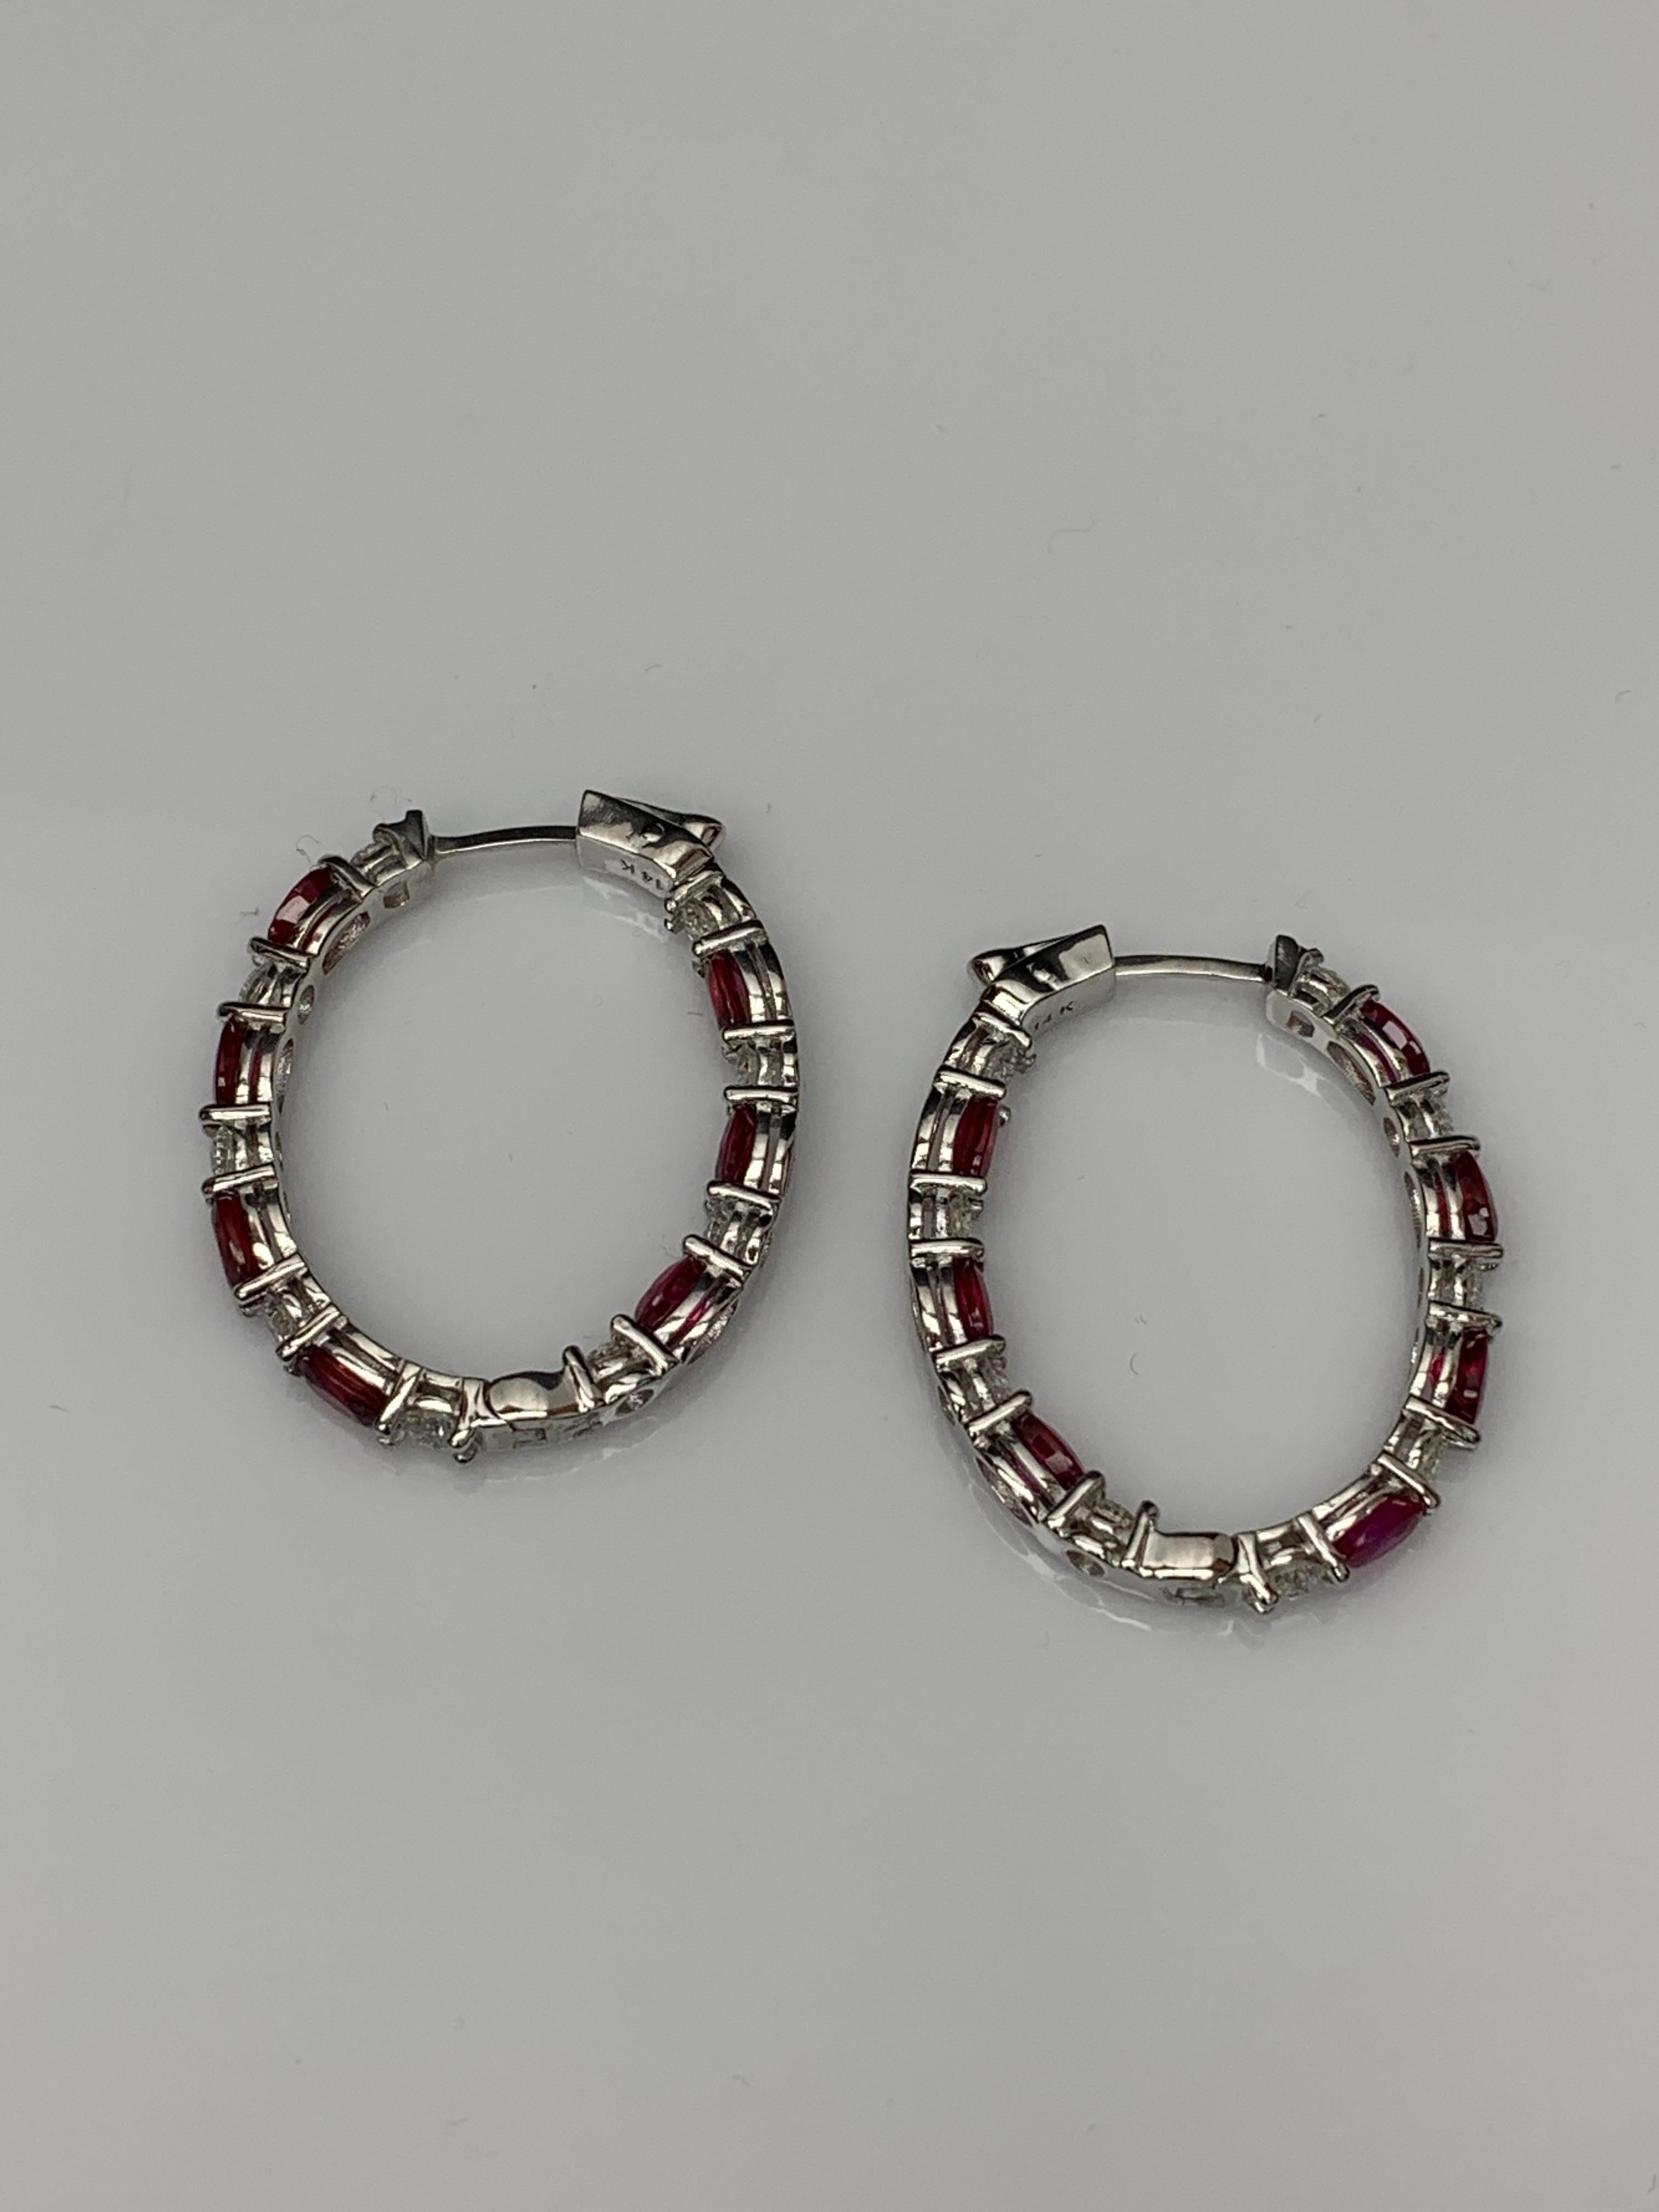 4.73 Carat Oval Cut Ruby and Diamond Hoop Earrings in 14K White Gold For Sale 9